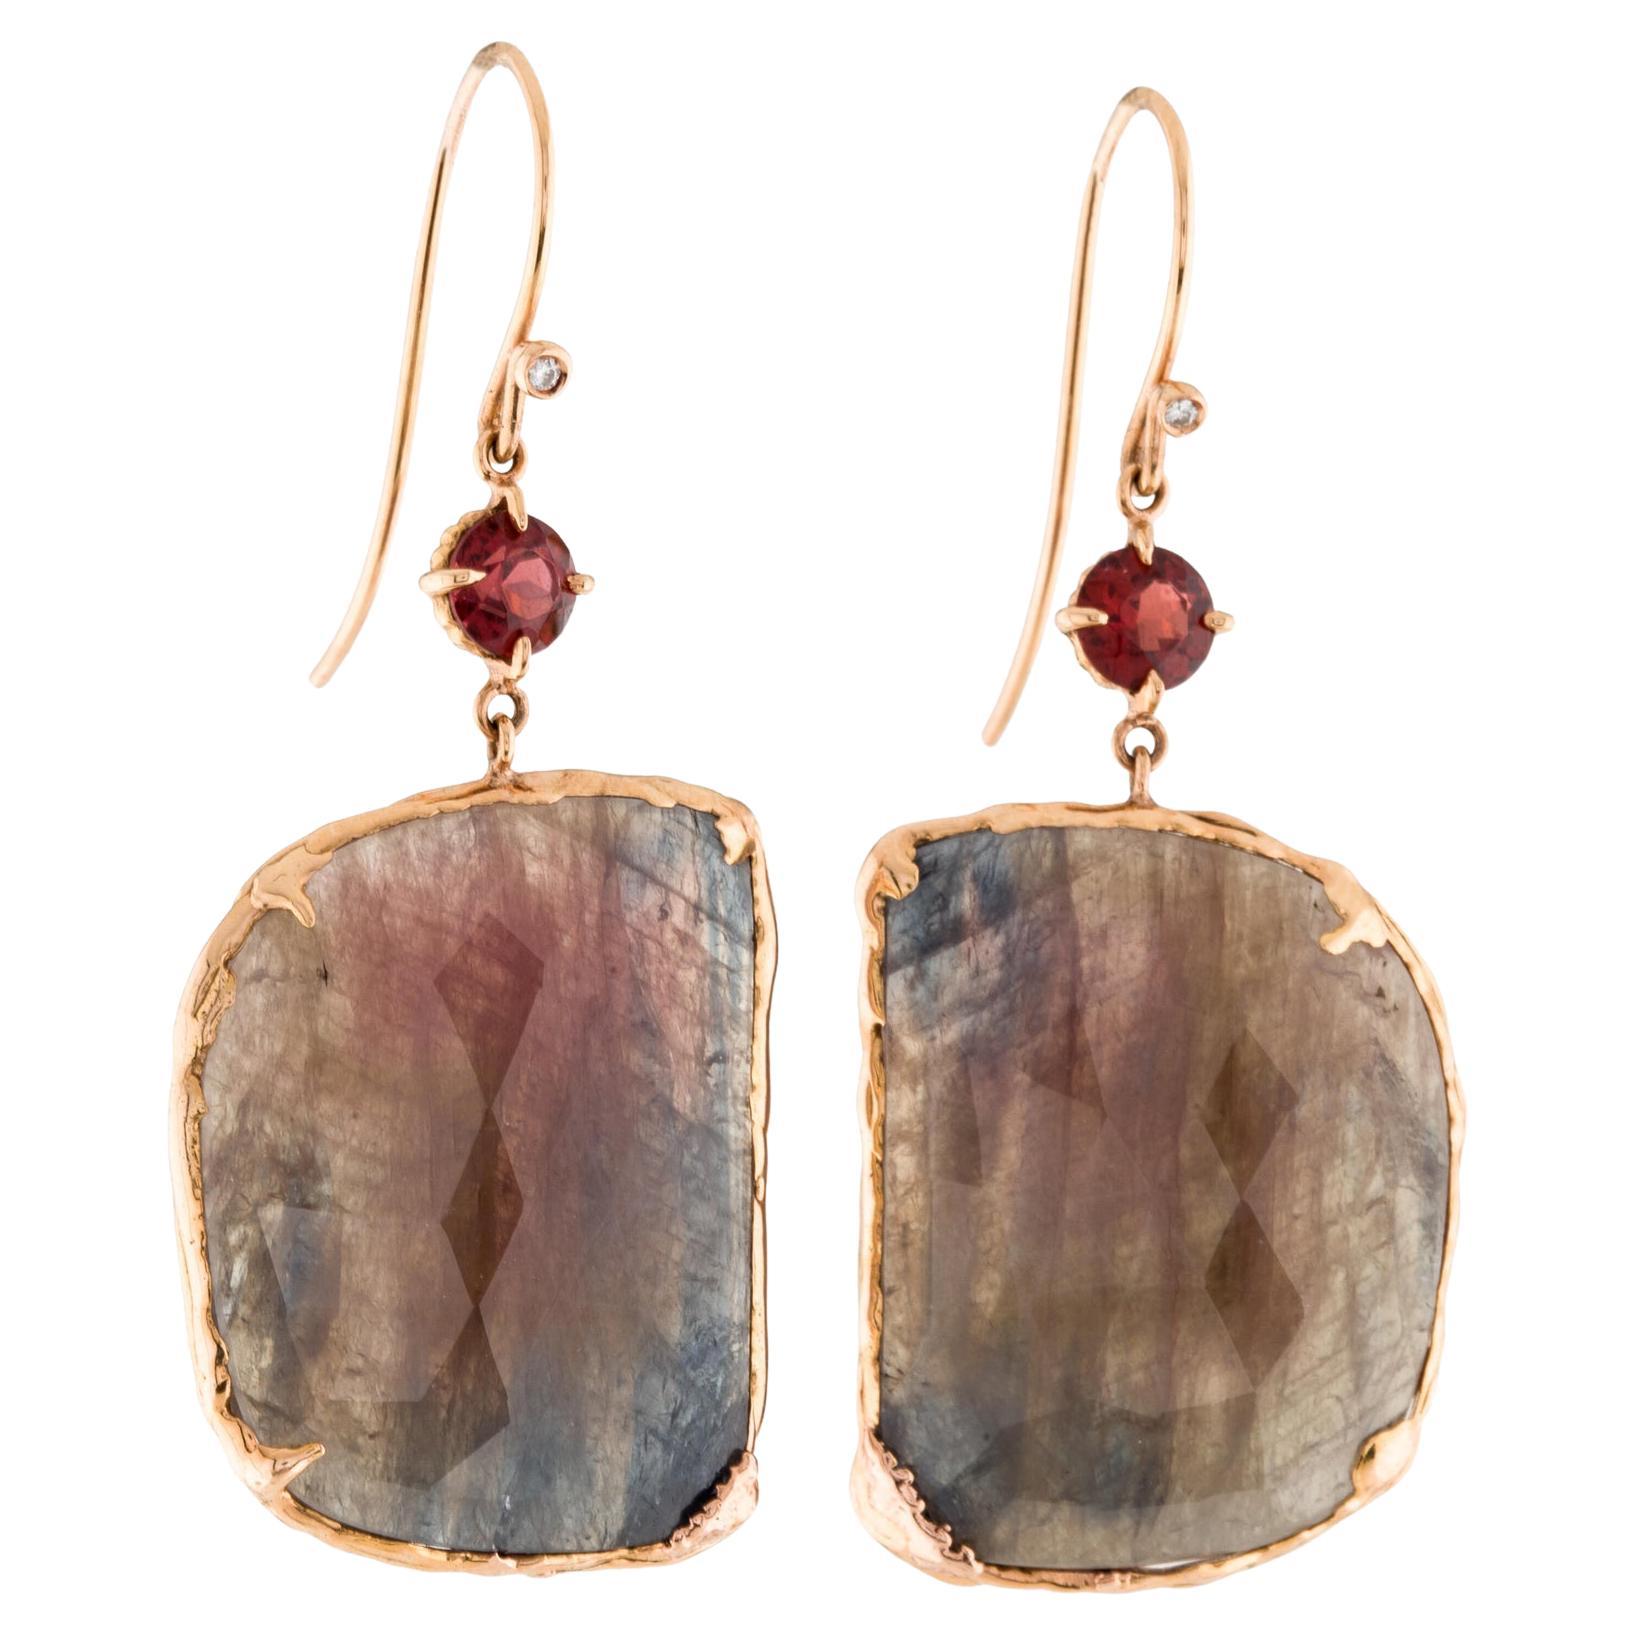 The 18 Karat Rose Gold Red Slice Sapphire Dangle Earrings are a stunning and unique addition to any jewelry collection. The earrings feature a mesmerizing red Sapphire slice that is complemented by the sparkle of .01ct diamonds and 1.25ct round